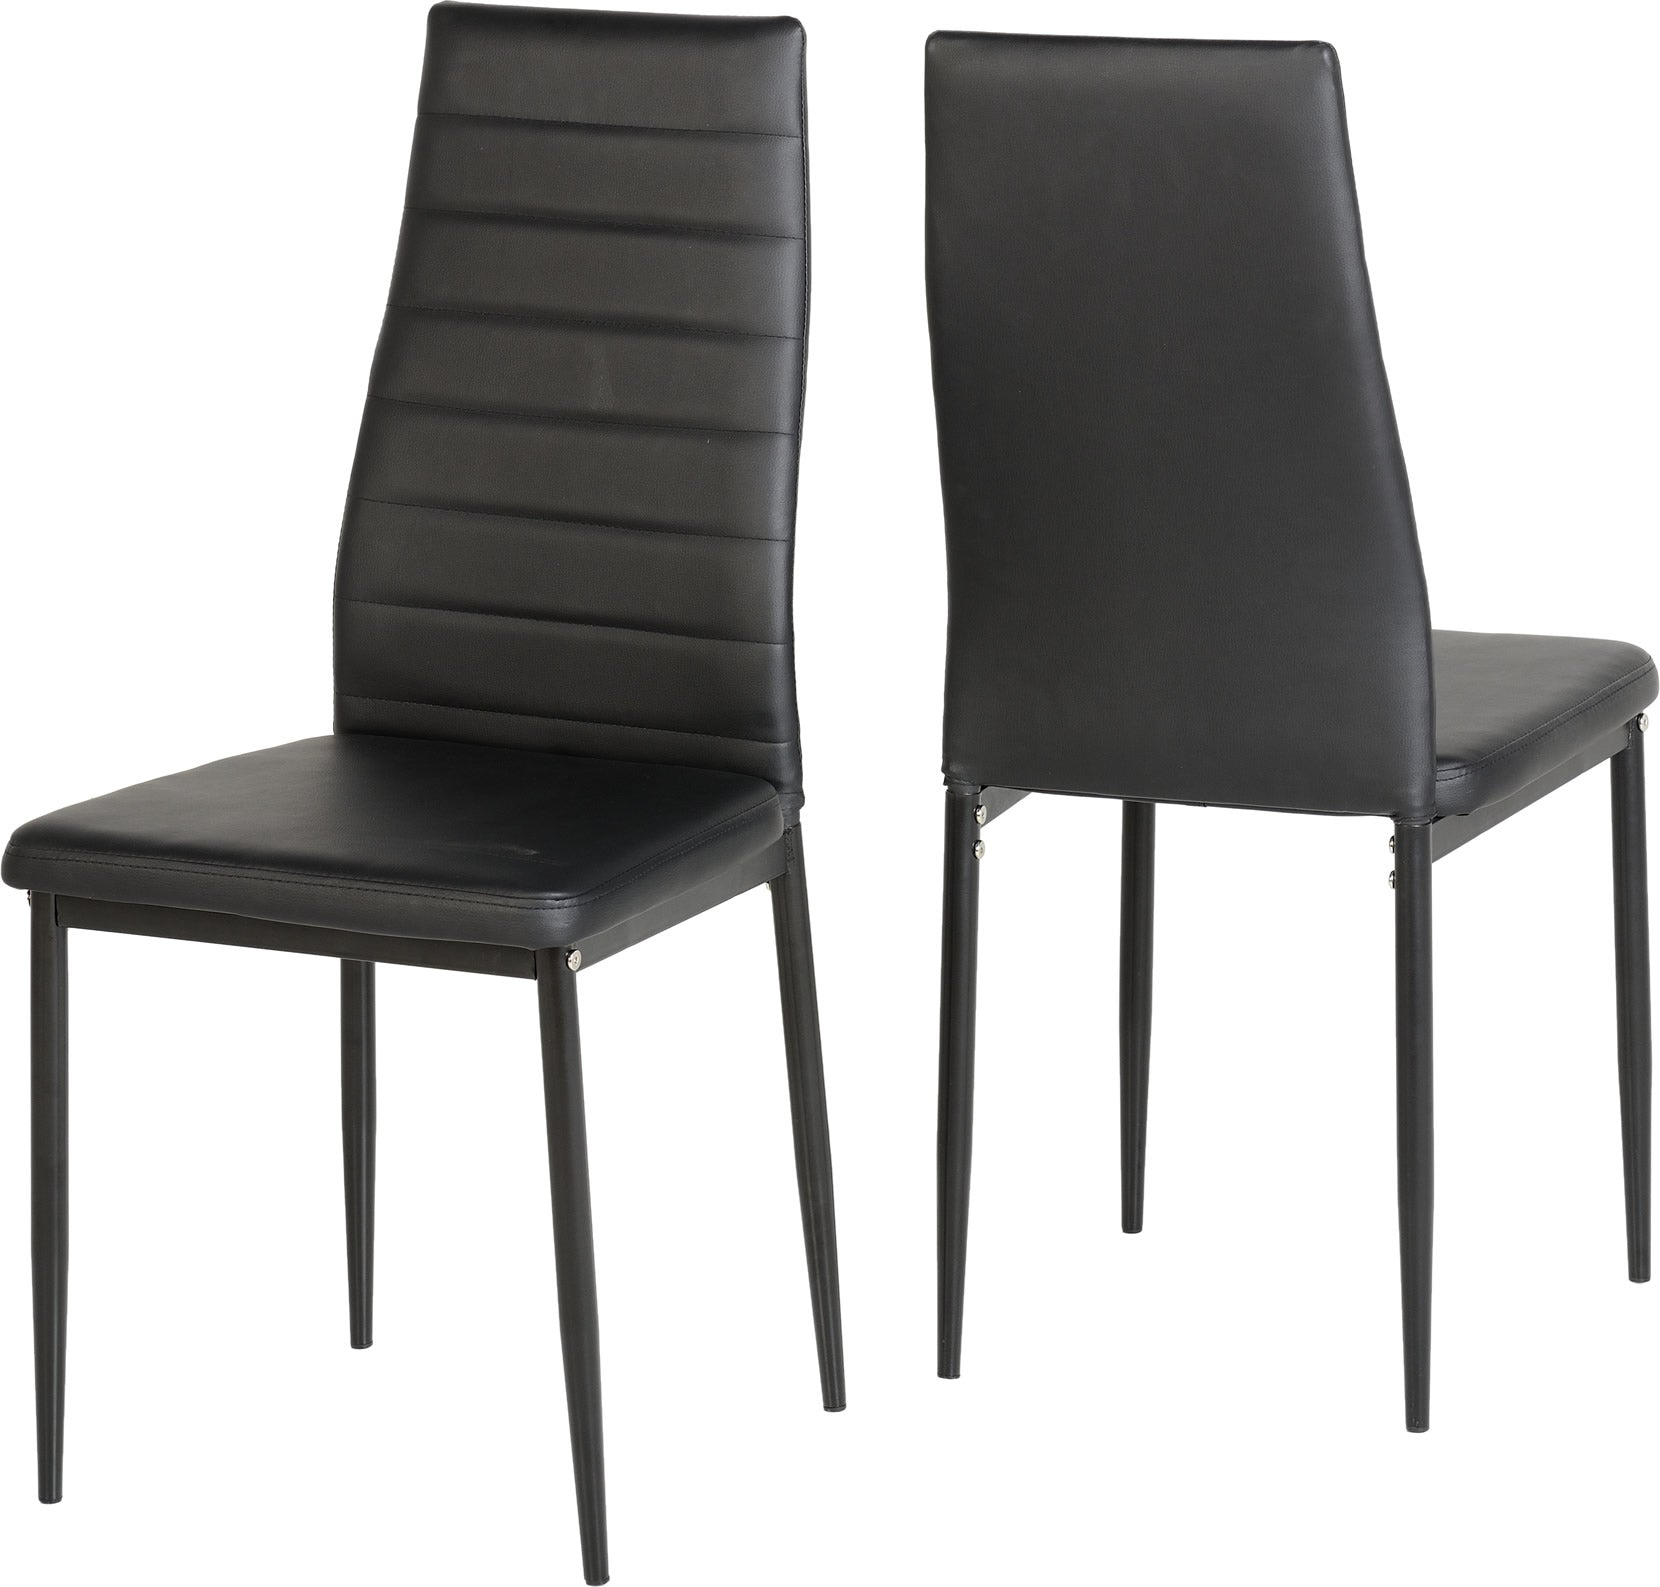 Abbey Dining Chair Black Faux Leather- The Right Buy Store